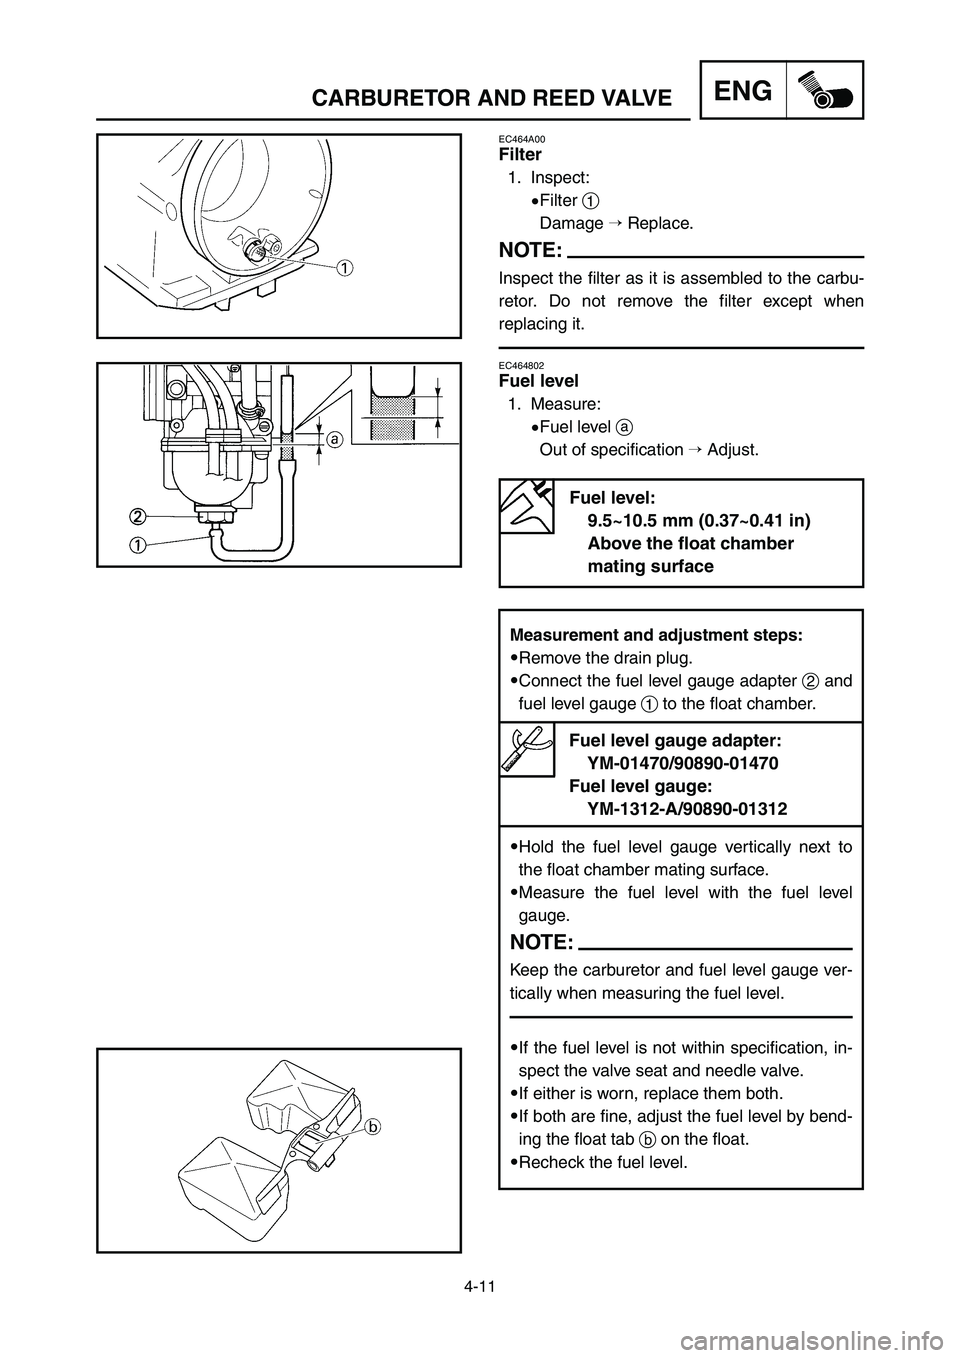 YAMAHA YZ125LC 2007  Owners Manual 4-11
ENGCARBURETOR AND REED VALVE
Measurement and adjustment steps:
9Remove the drain plug.
9Connect the fuel level gauge adapter 2and
fuel level gauge 1to the float chamber.
Fuel level gauge adapter: